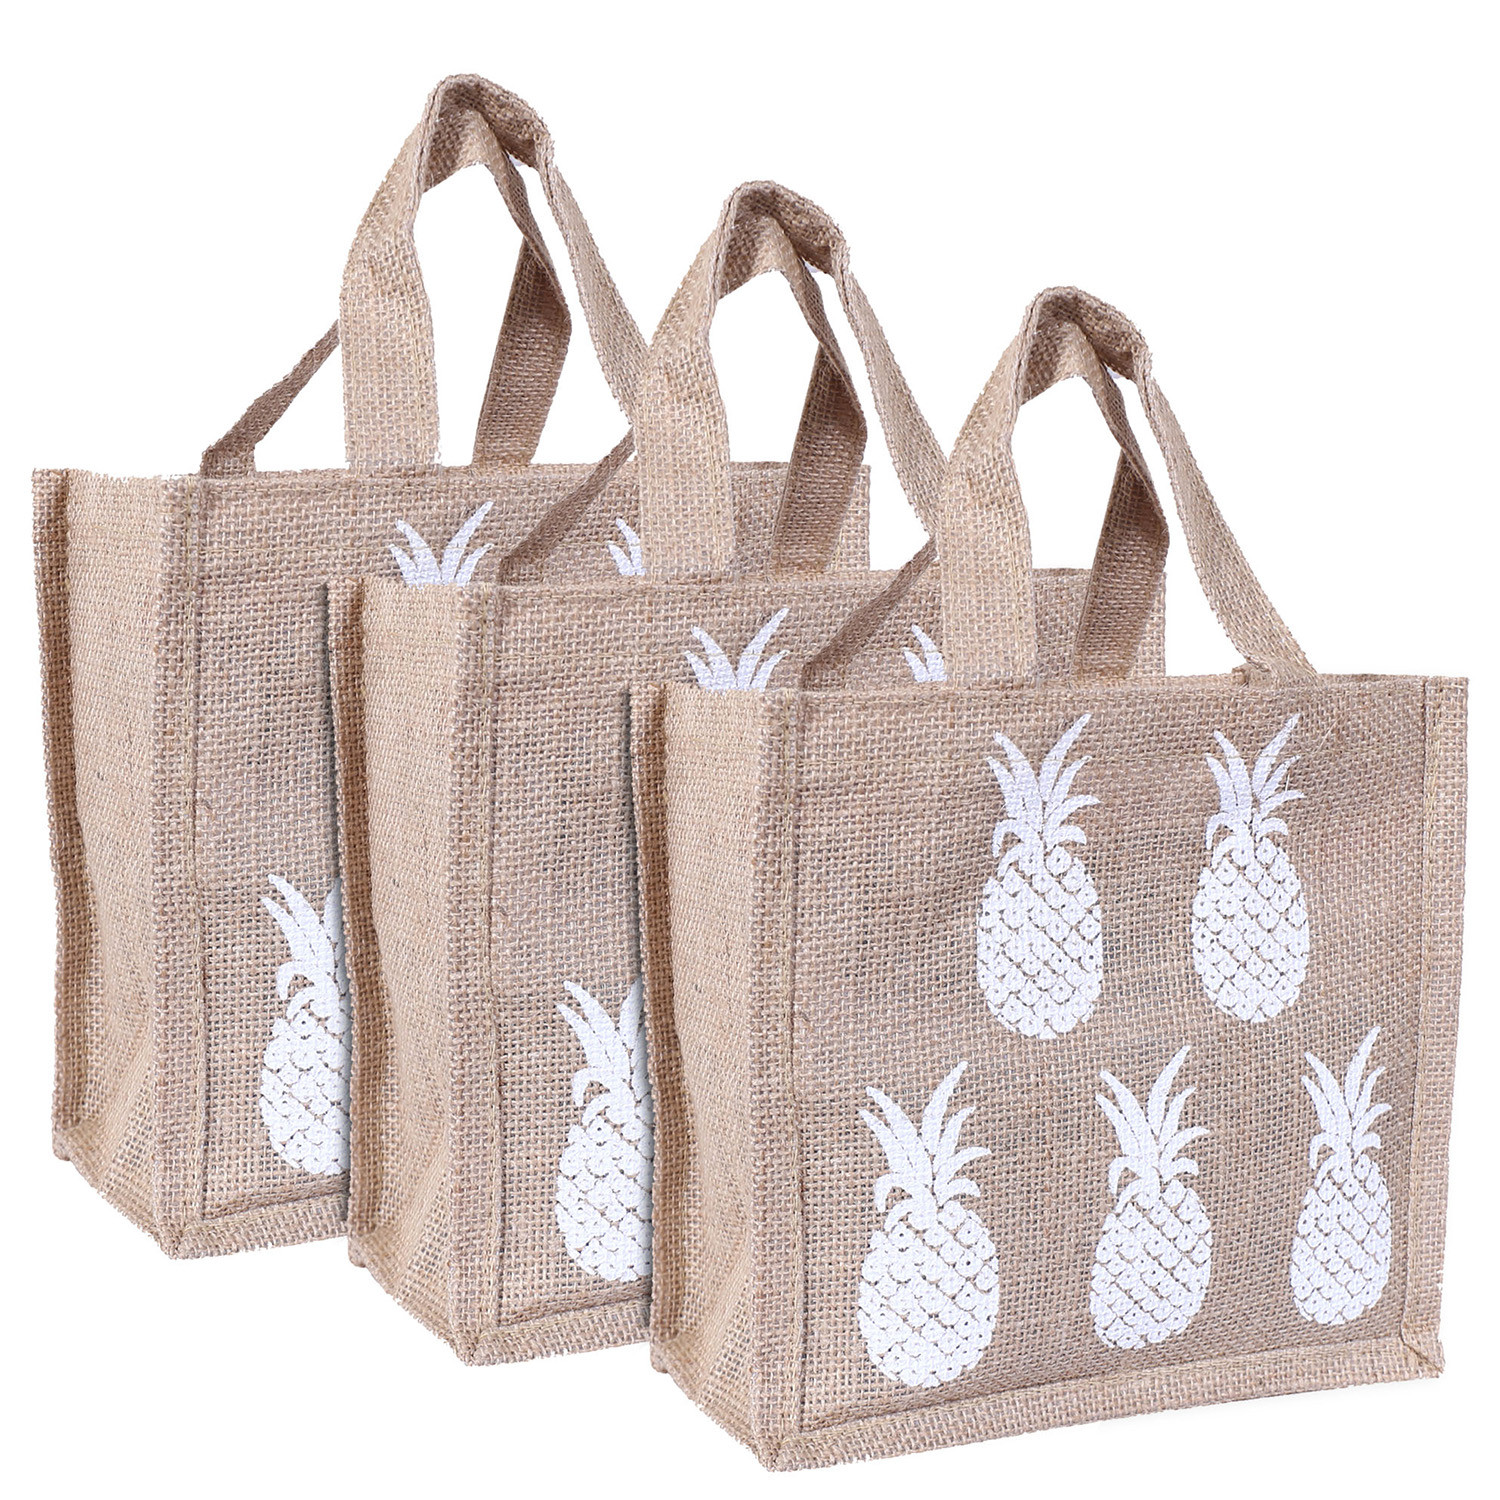 Kuber Industries Lunch Bag|Reusable Jute Fabric Tote Bag|Pineapple Print Tiffin Carry Hand bag with Handle For office,School,Gift (Brown)